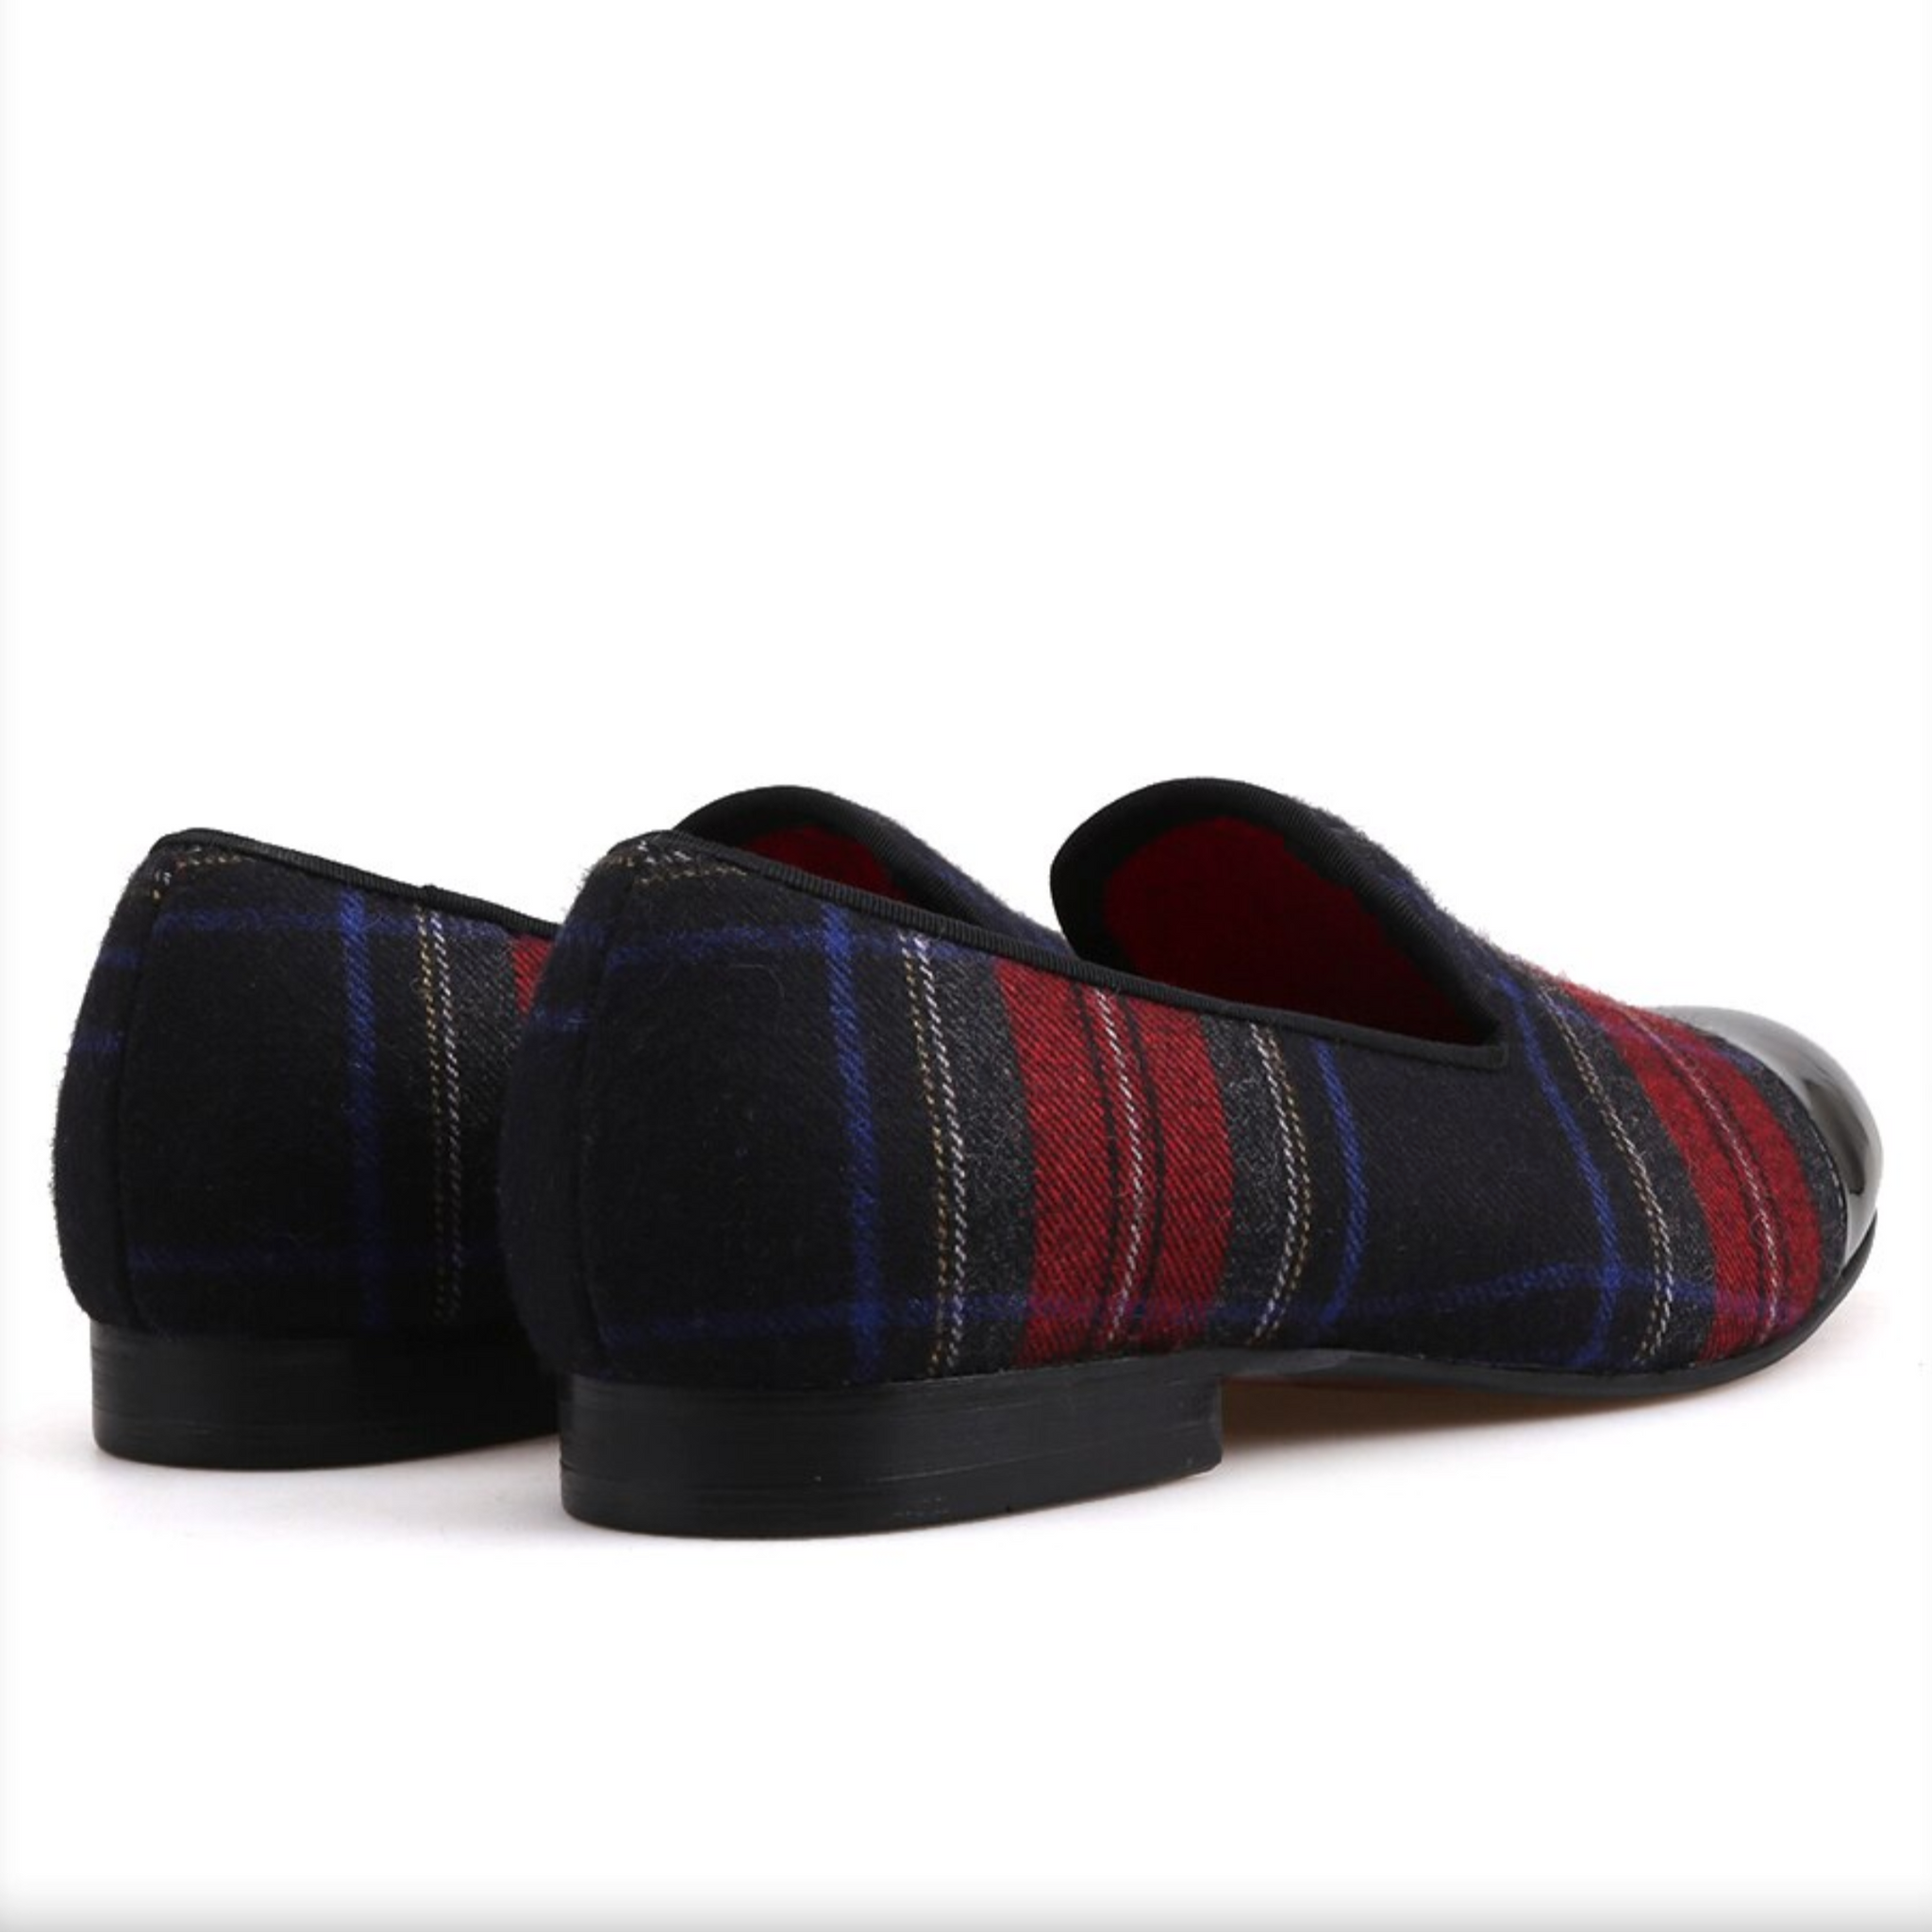 Tartan fabric loafers with red quilted lining and a black leather-look toe cover.